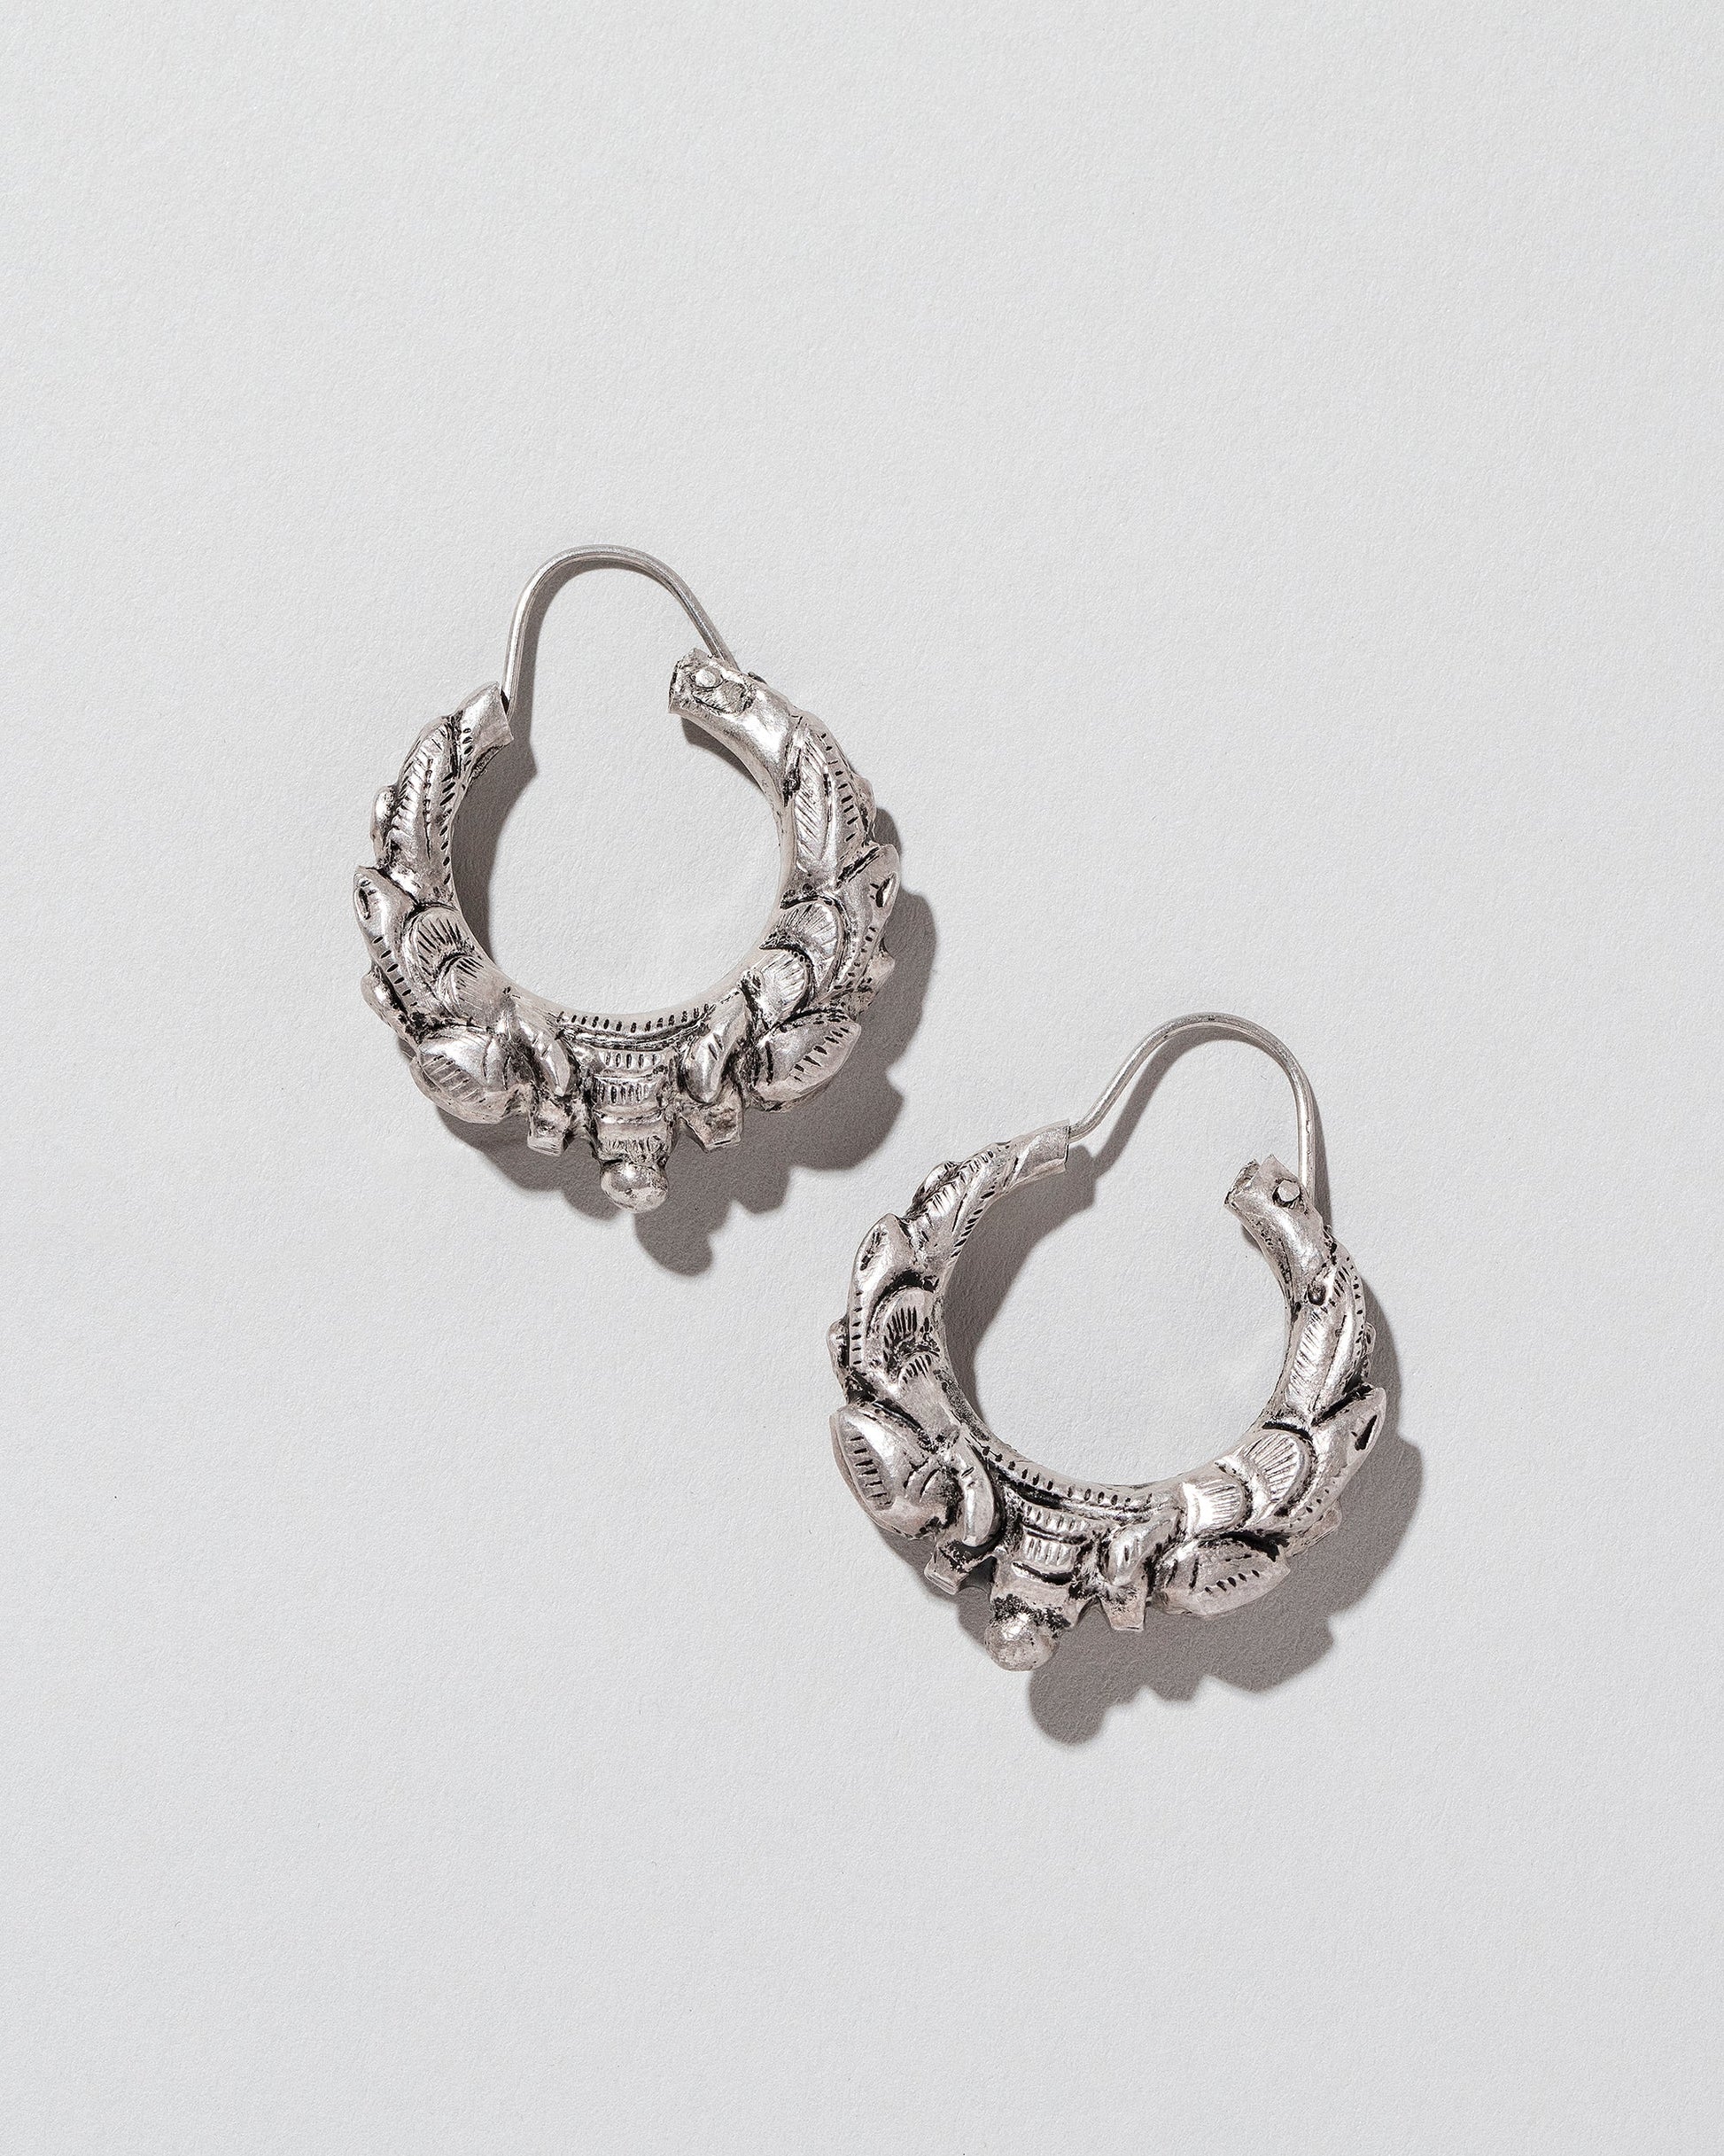  Silver Italian Hoops on light color background.